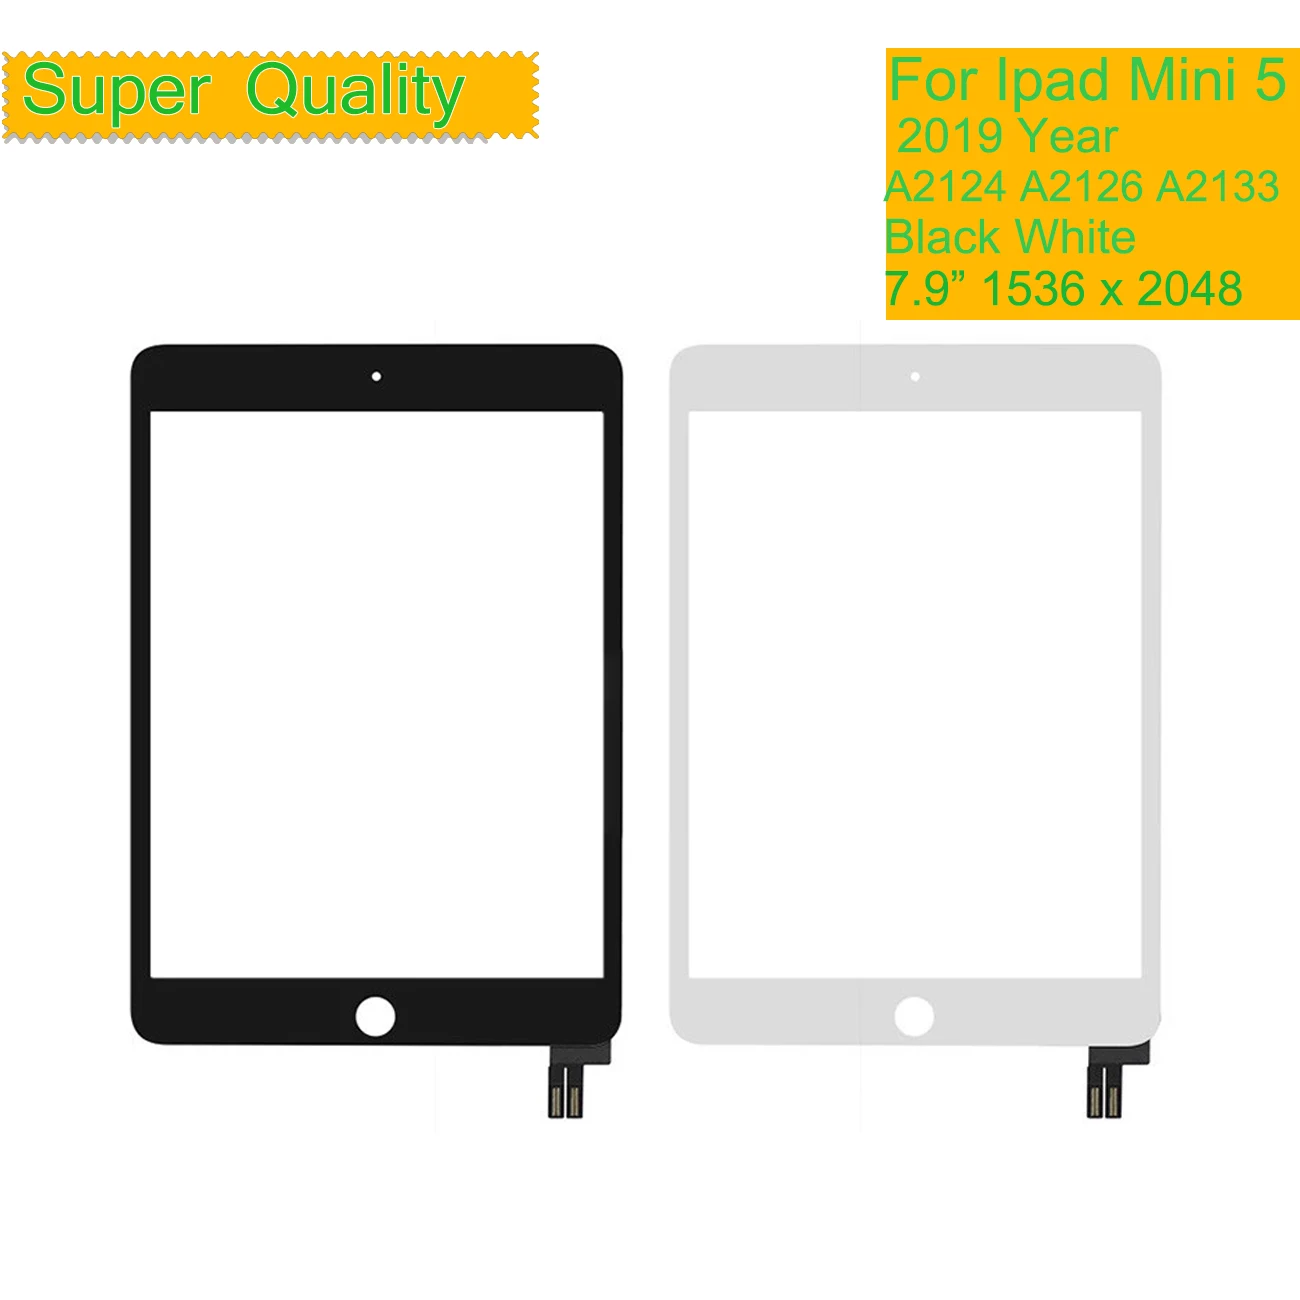 10Pcs/Lot For Apple iPad Mini 5 Touch Screen Digitizer Panel For iPad Mini 5 2019 A2124 A2126 A2133 LCD Front Outer Glass Sensor 10pcs lot glass oca lcd front outer lens for lg k30 k40 k71 k50s k41s k51s k61 k22 k42 k52 k62 touch screen panel